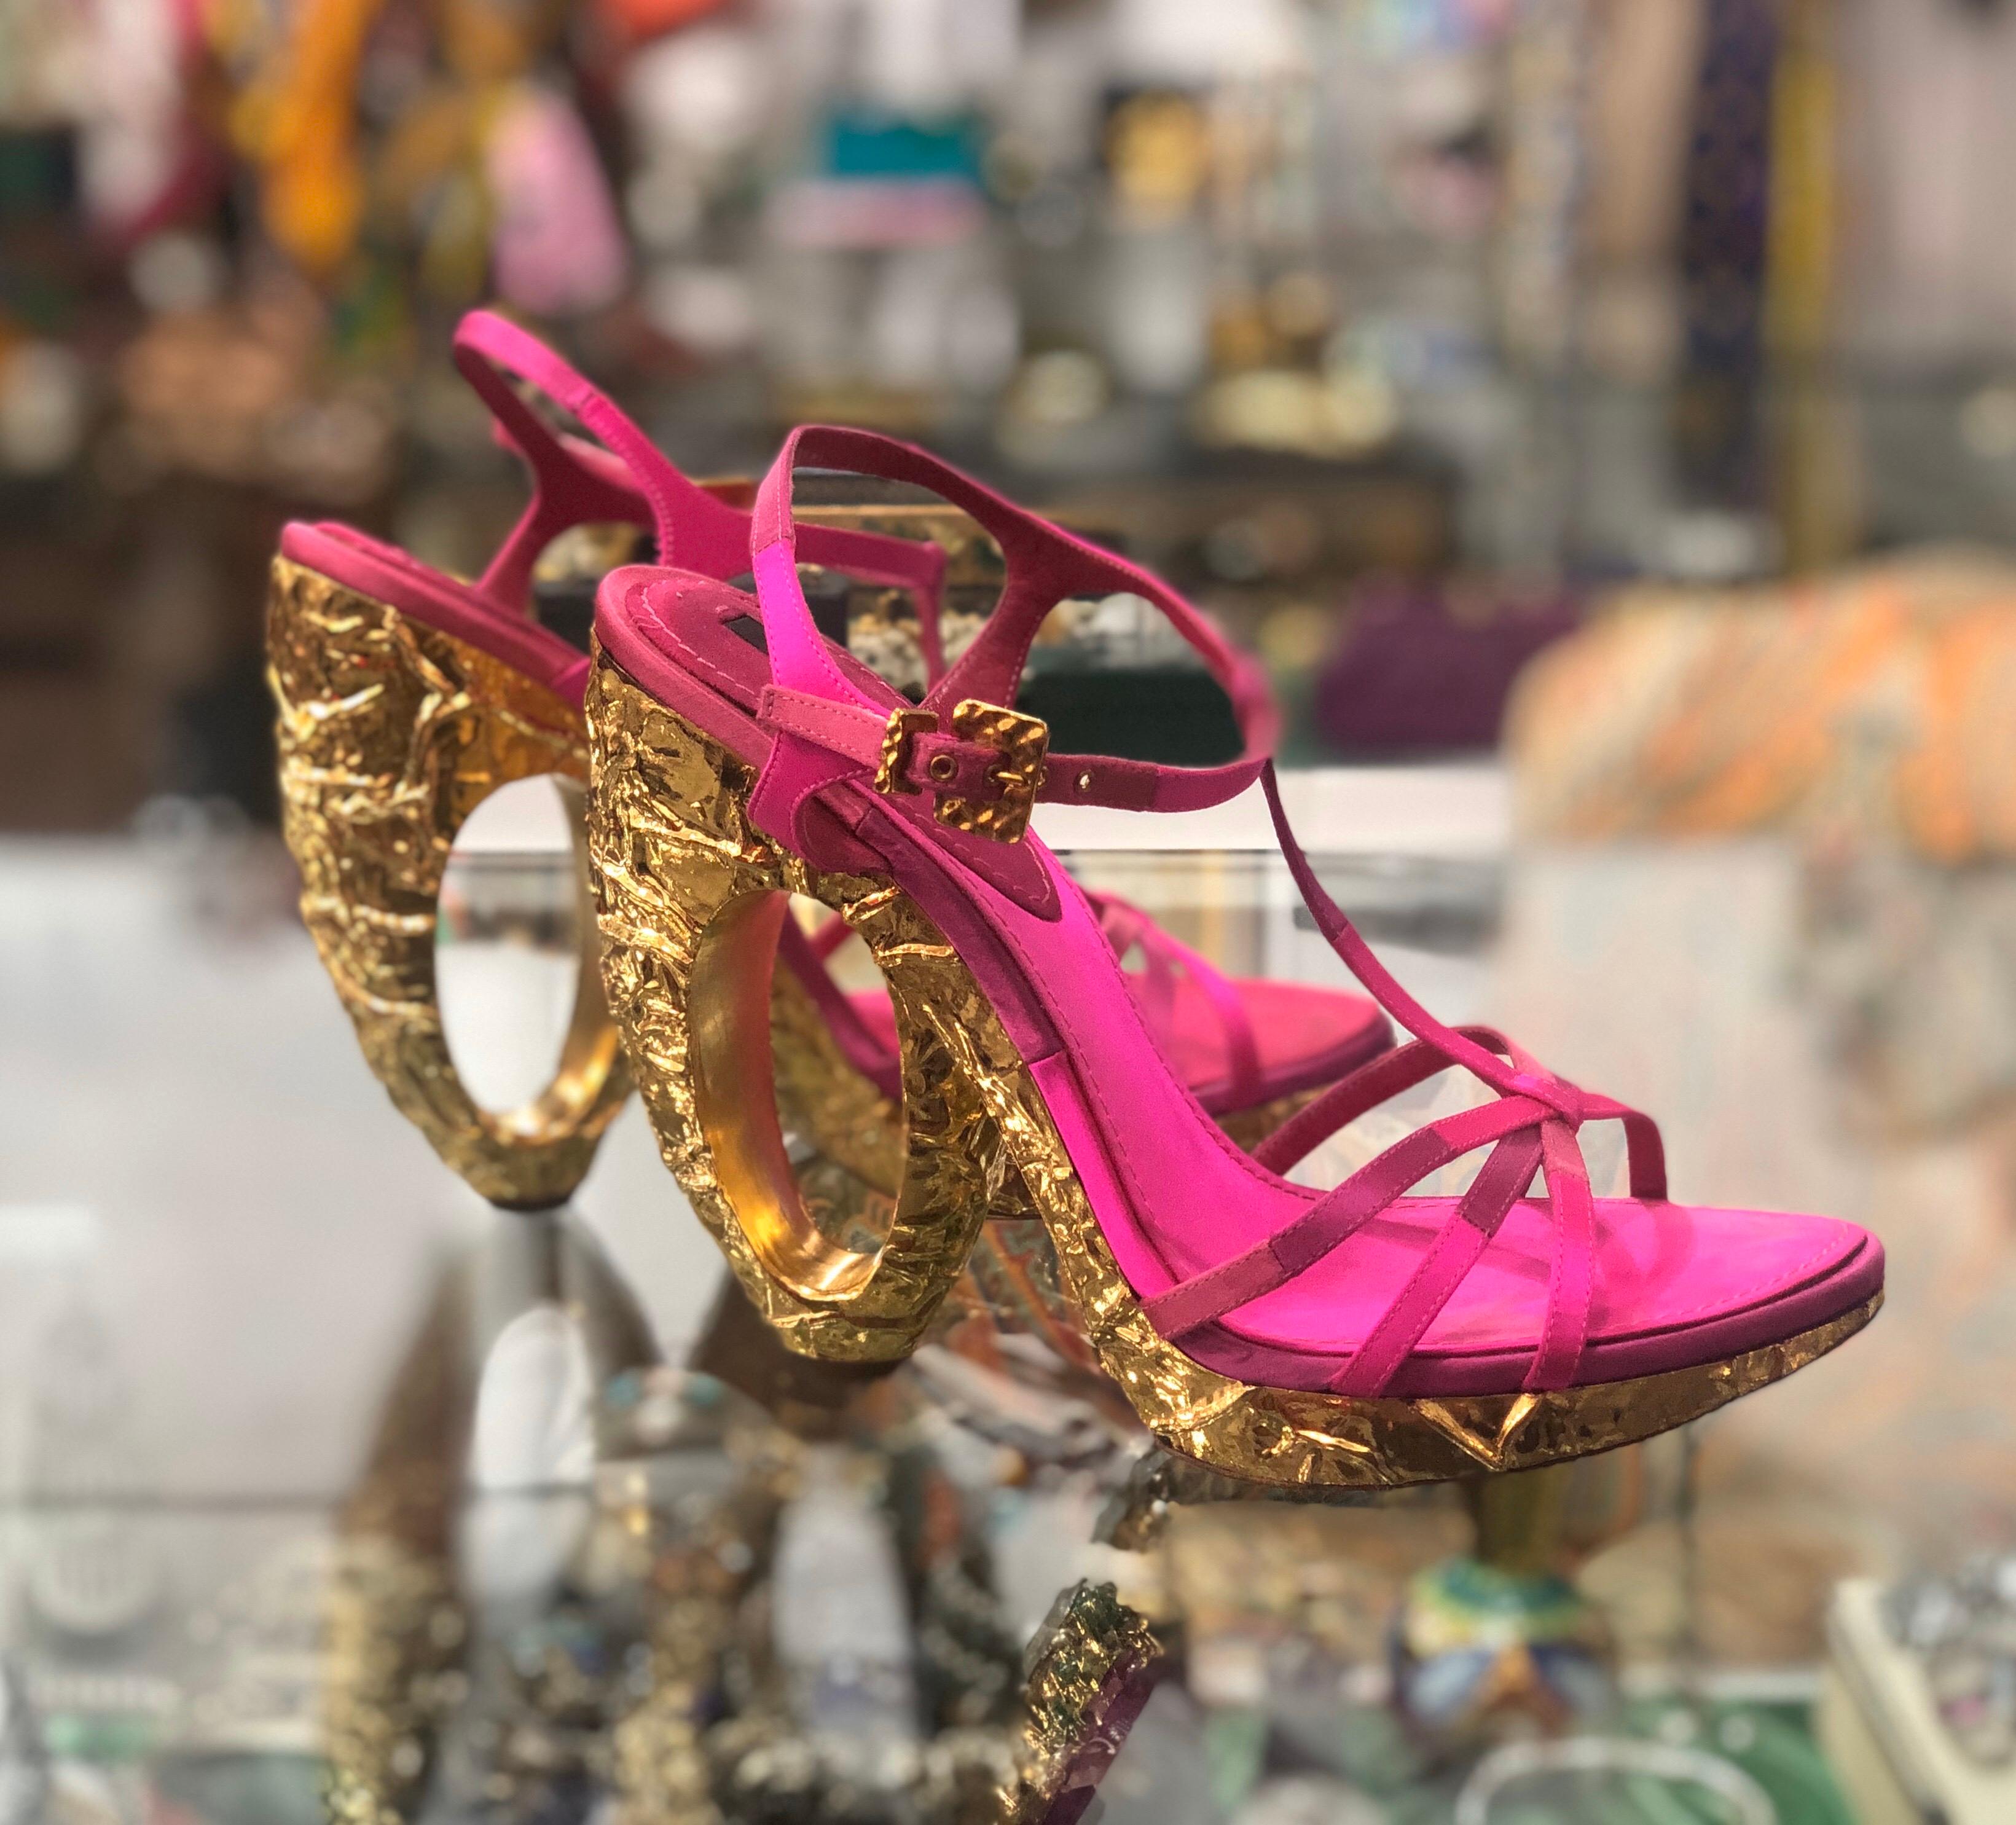 Looking to make a statement? Well the perfect shoes have arrived! Circa recent 2000s, these Louis Vuitton fuchsia satin heels feature various hues of fuchsia on the straps and a sculpted heel with a crushed textured gold finish. A true showstopper,